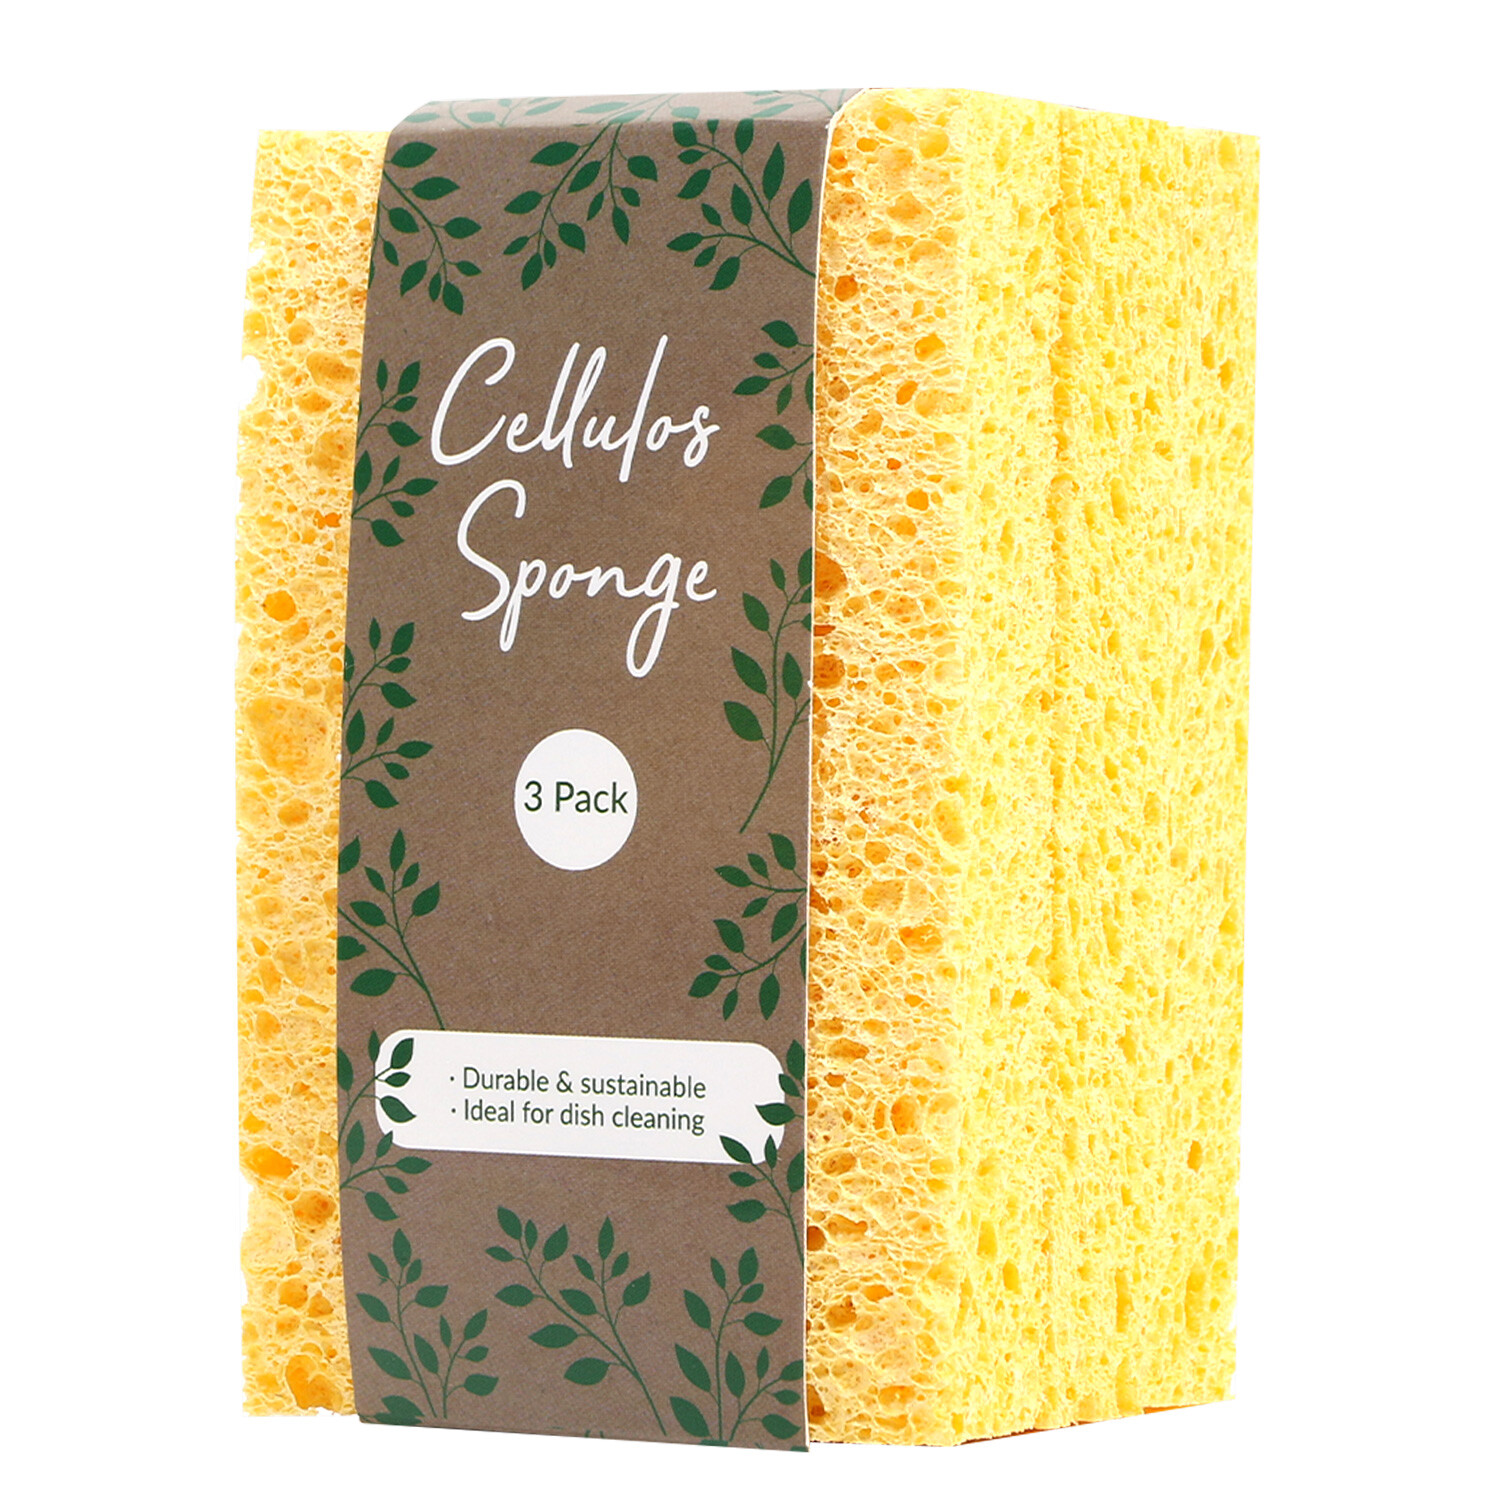 Pack of 3 Cellulose Sponges - Yellow Image 2